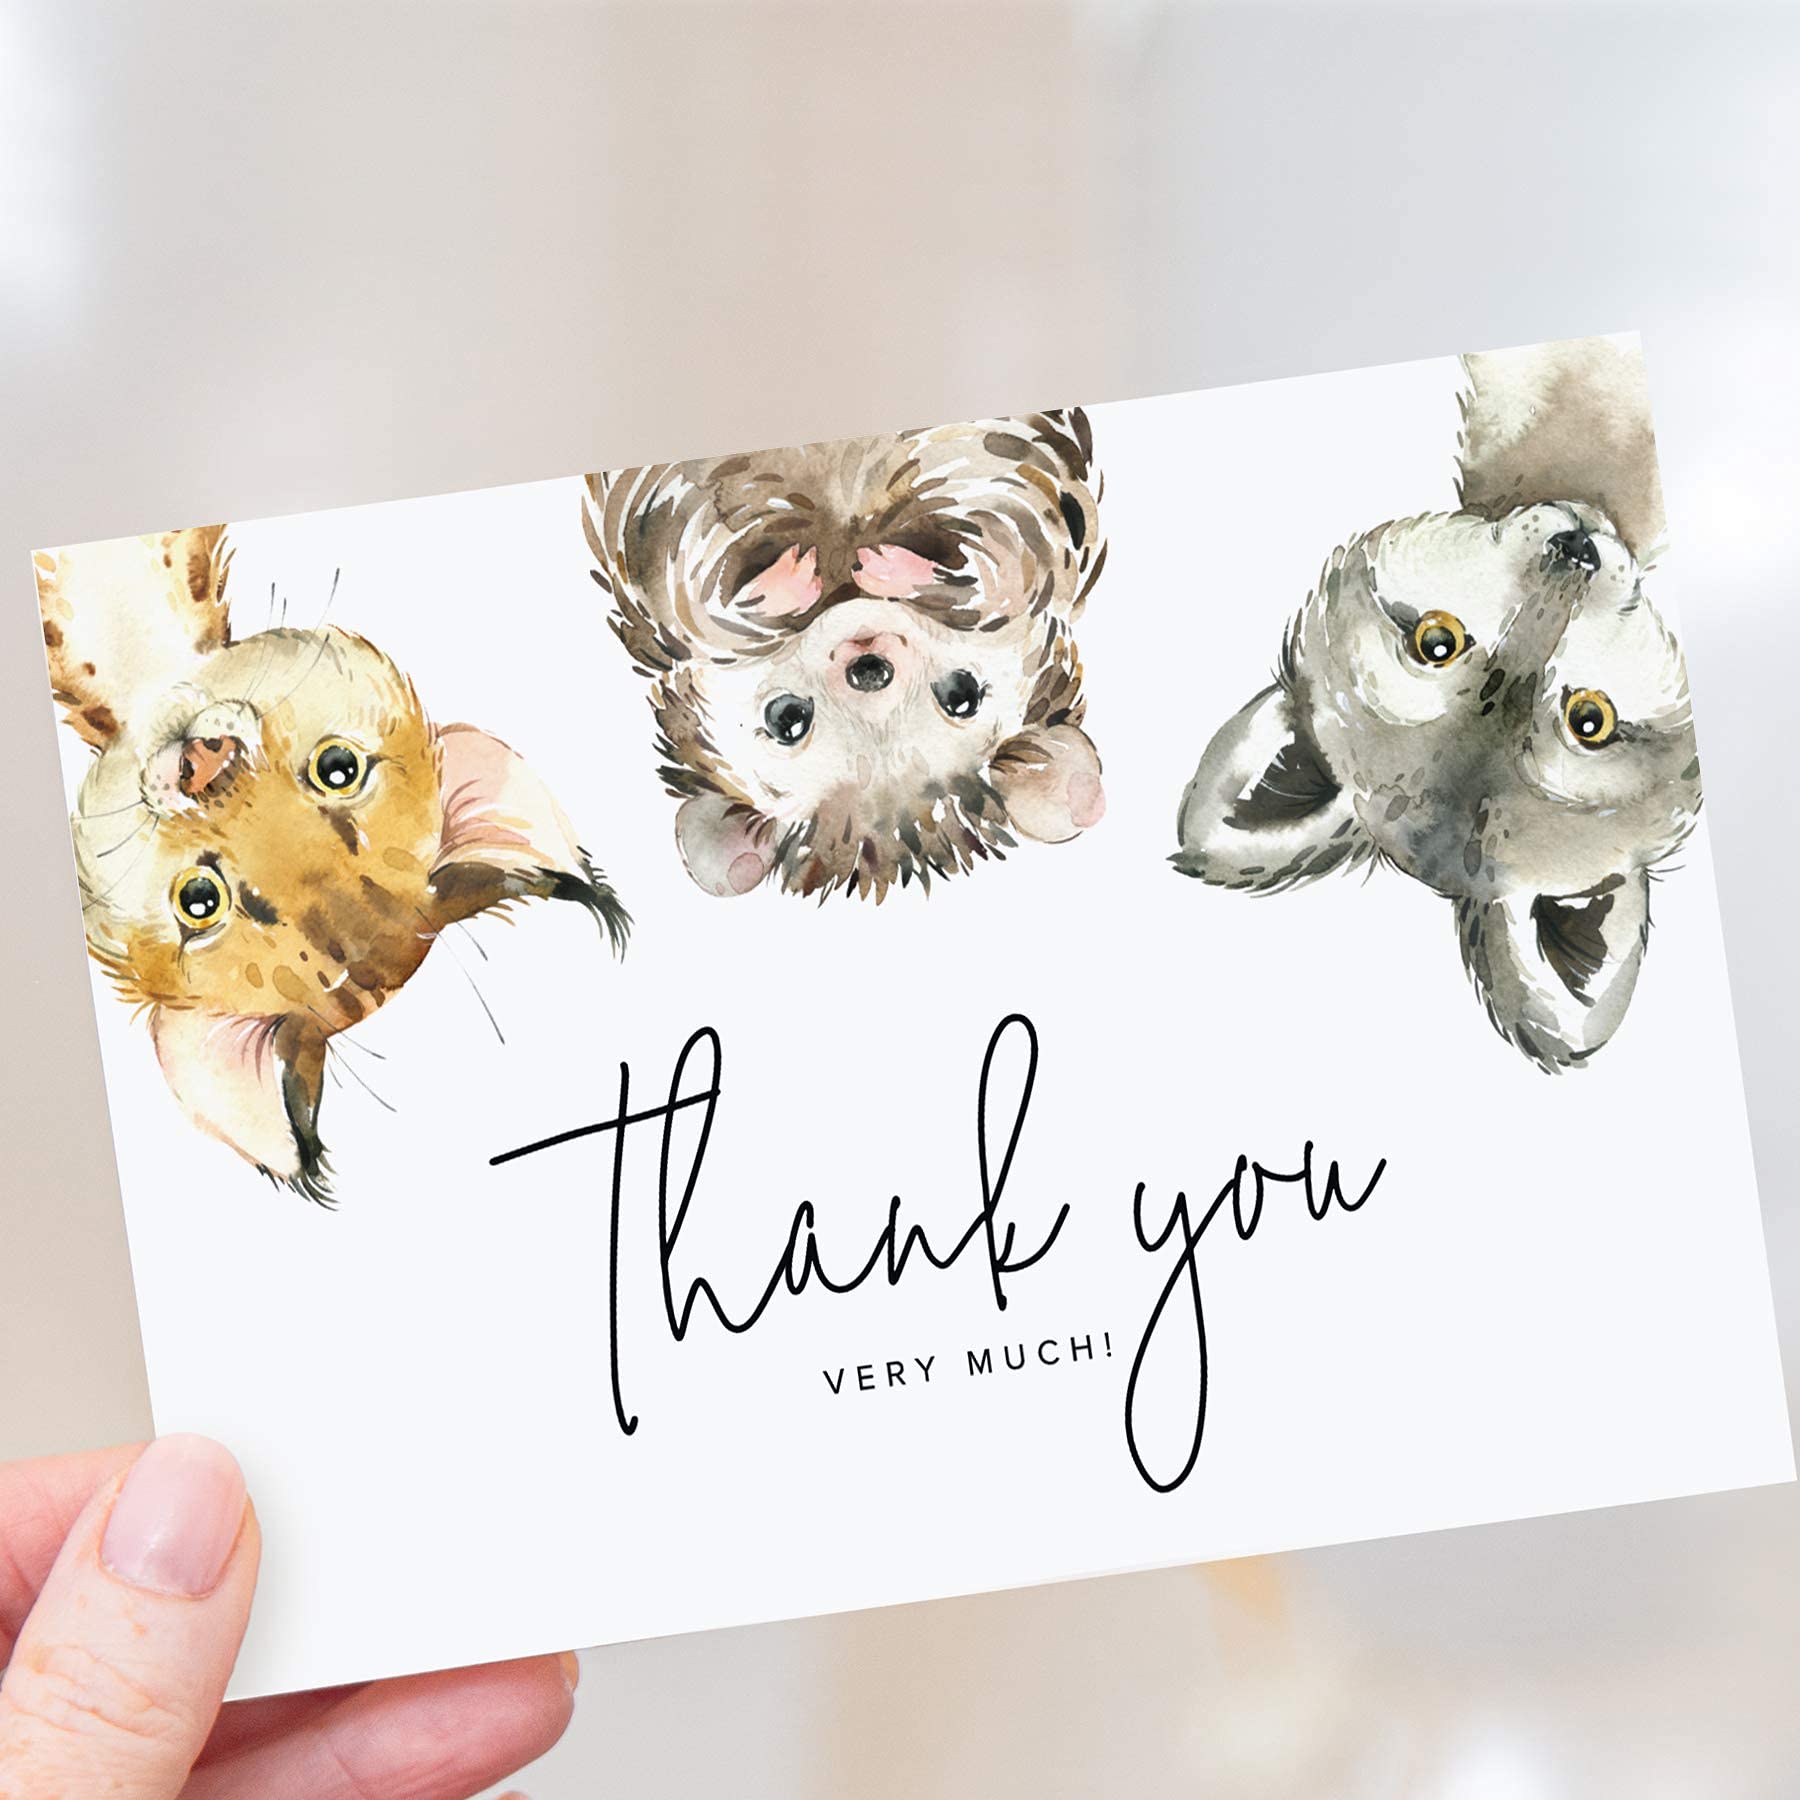 Bliss Collections Thank You Cards with Envelopes, Woodland Animal, All-Occasion Thank You Cards for Weddings, Bridal Showers, Baby Showers, Birthdays, Parties and Special Events, 4